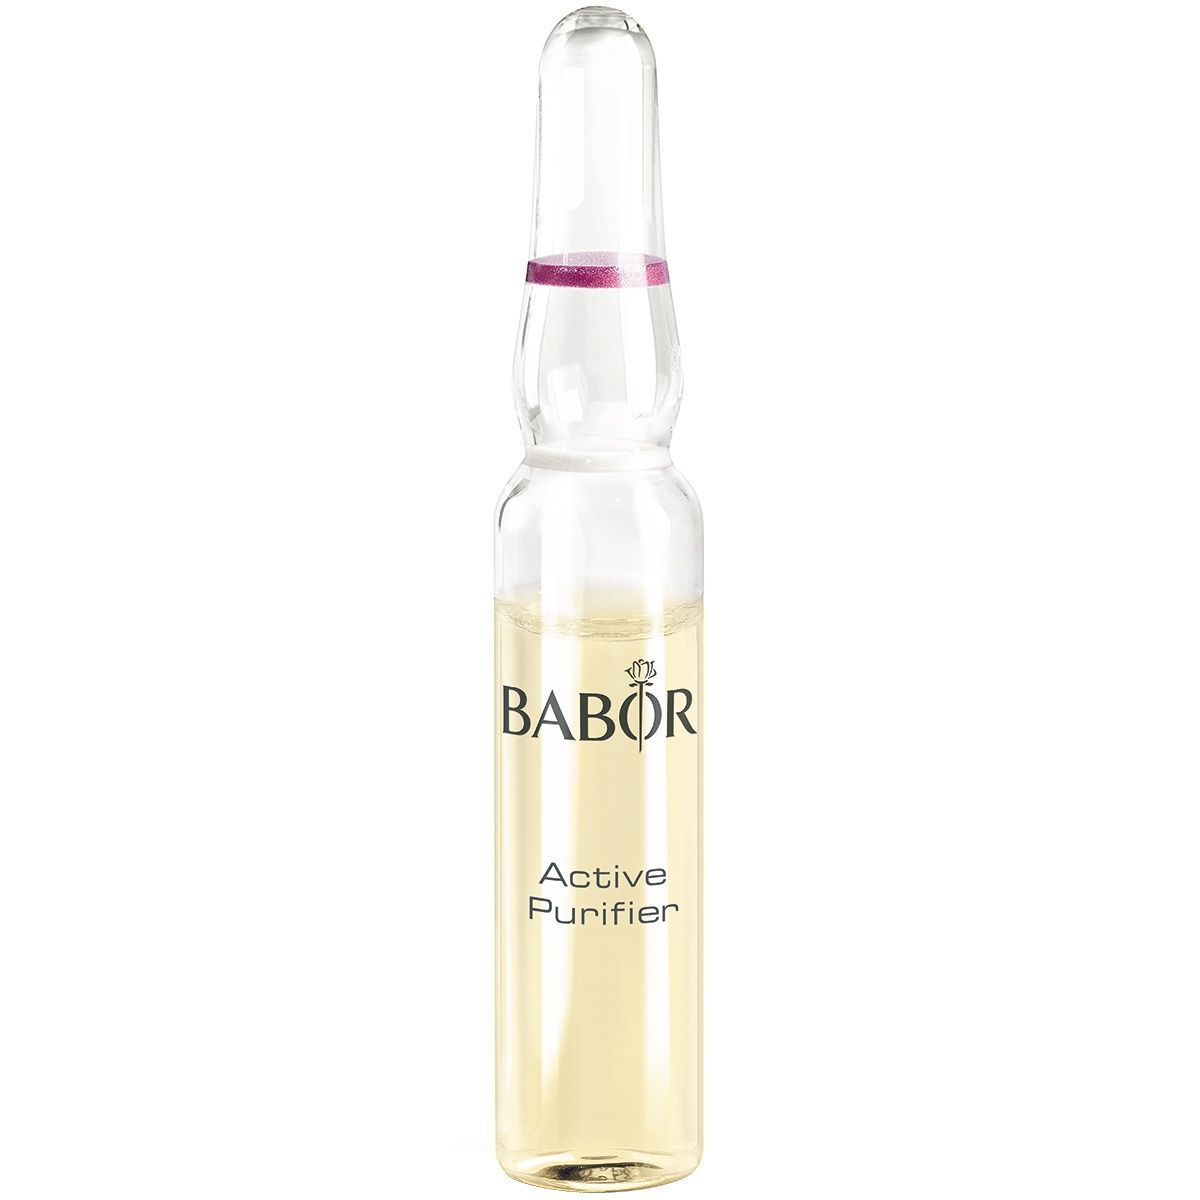 BABOR Active Purifier